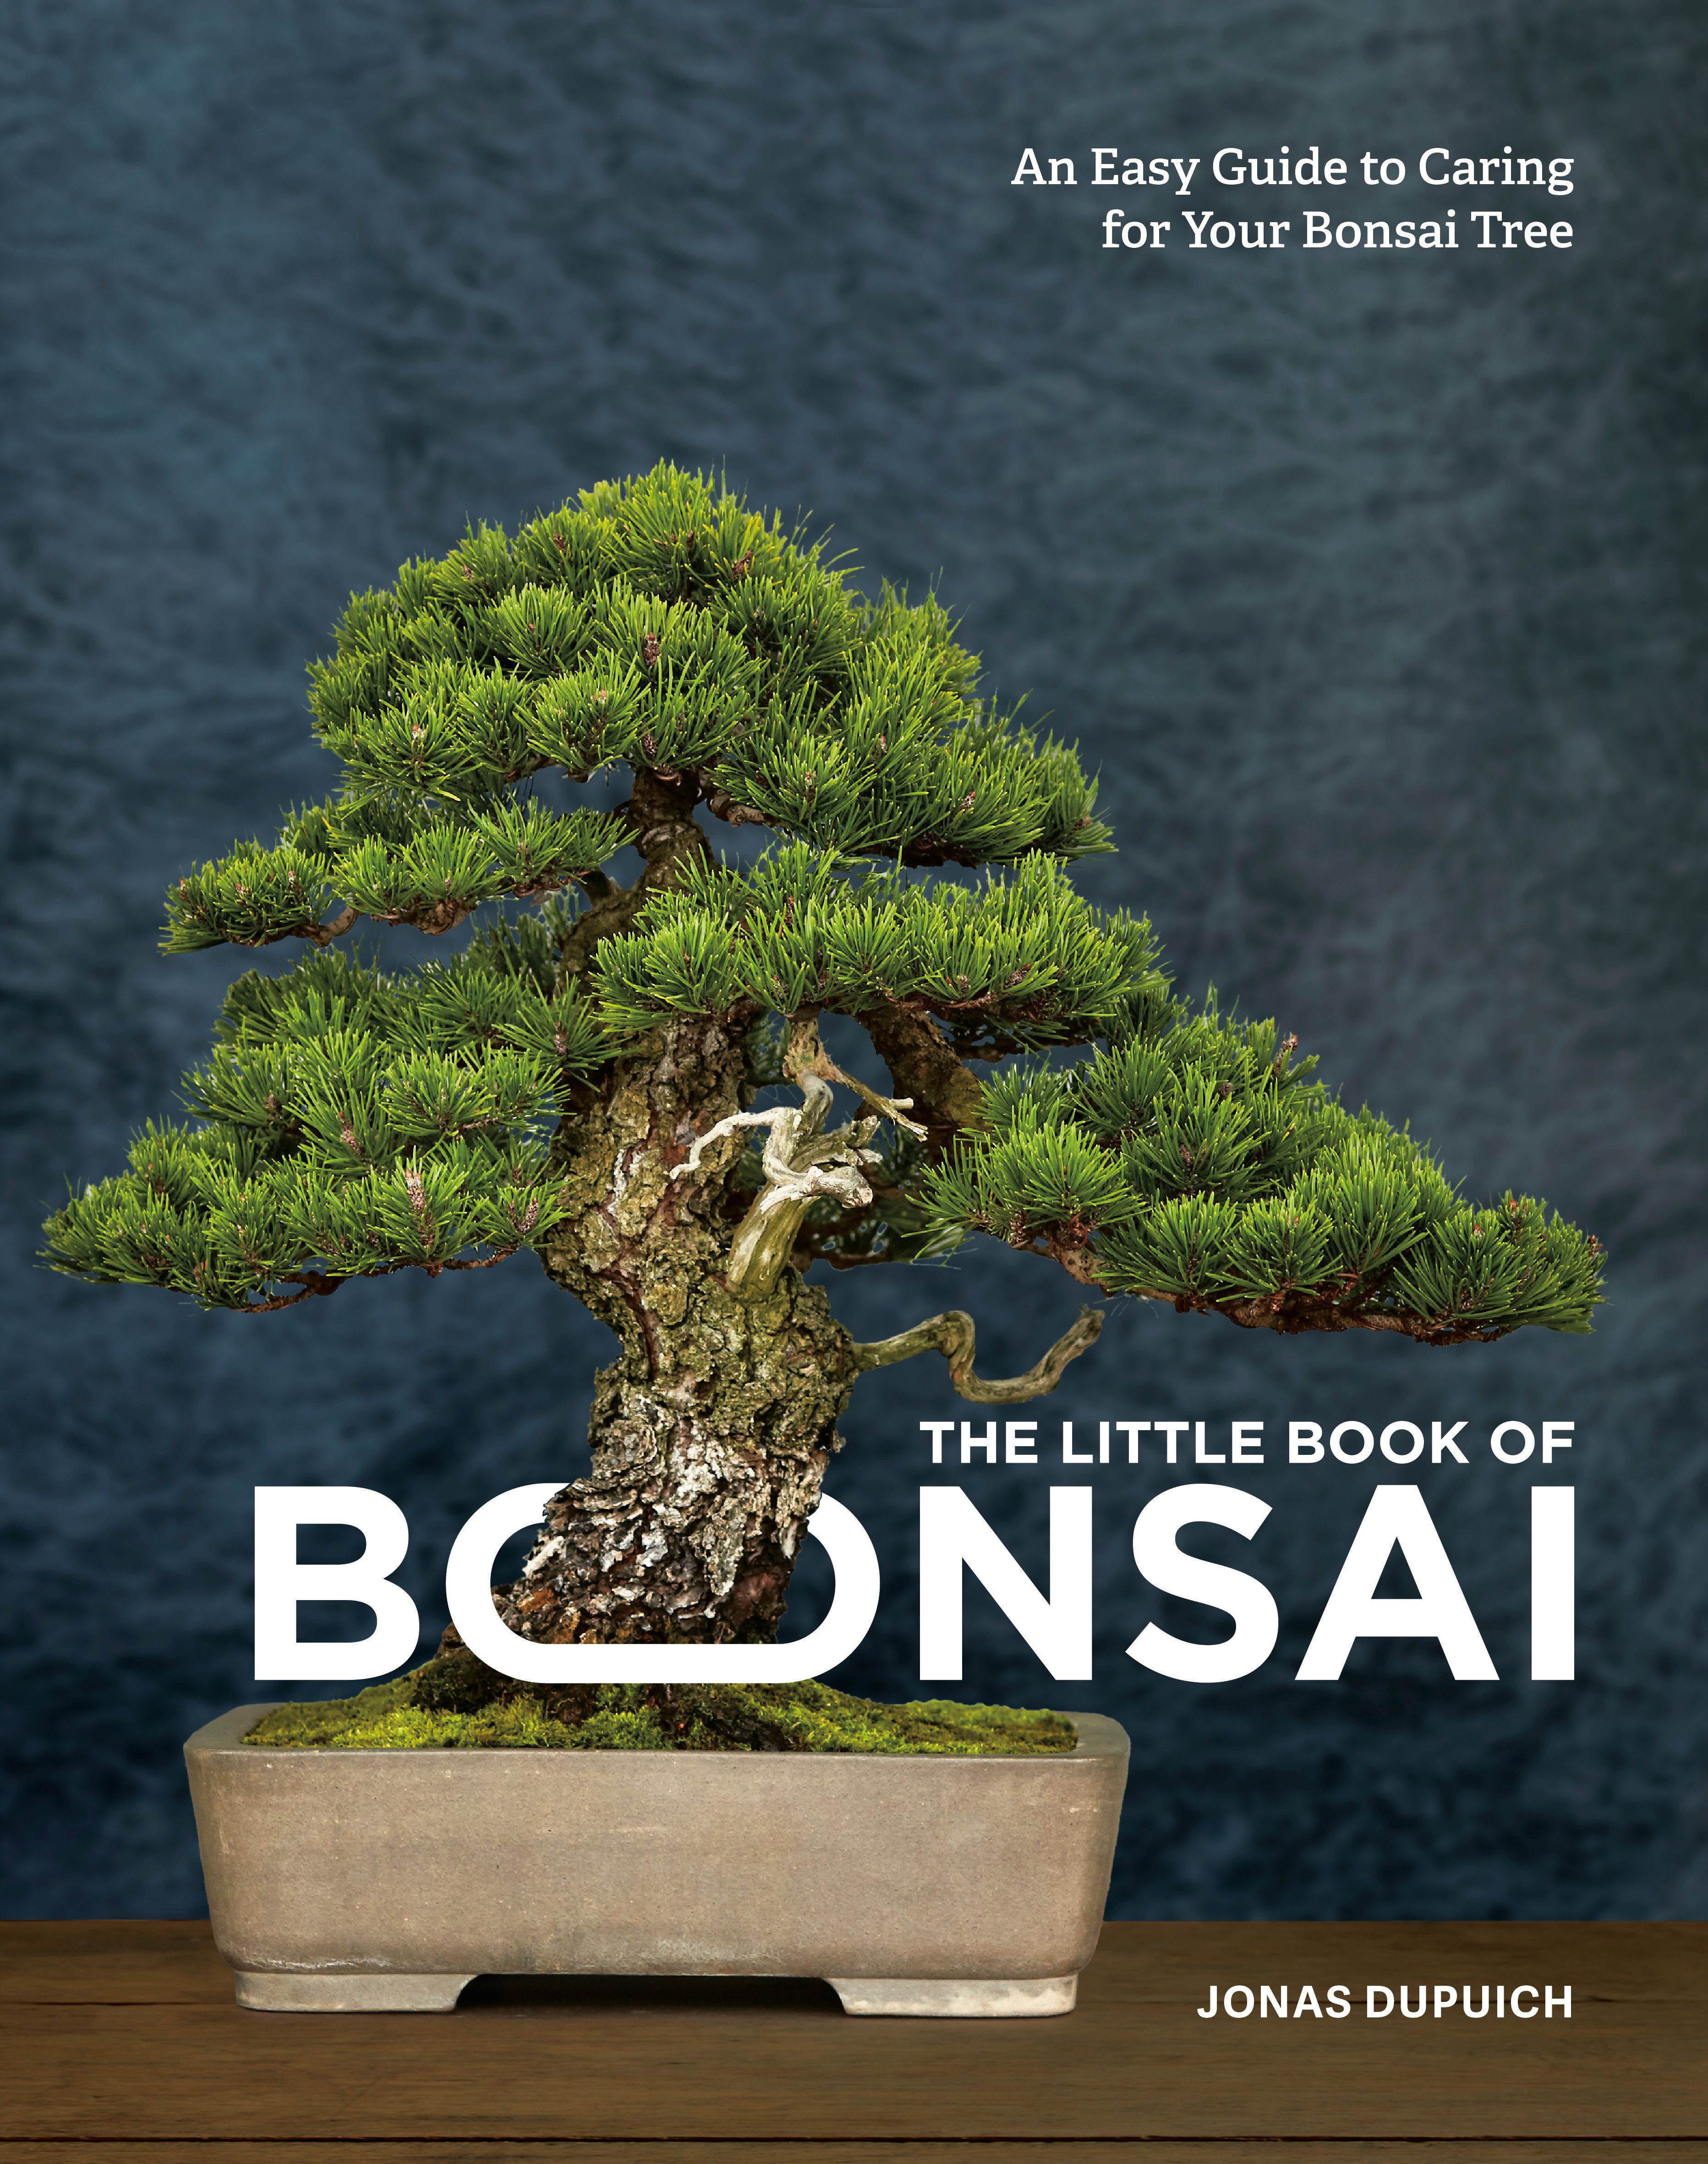 The Little Book Of Bonsai (Hardcover Book)